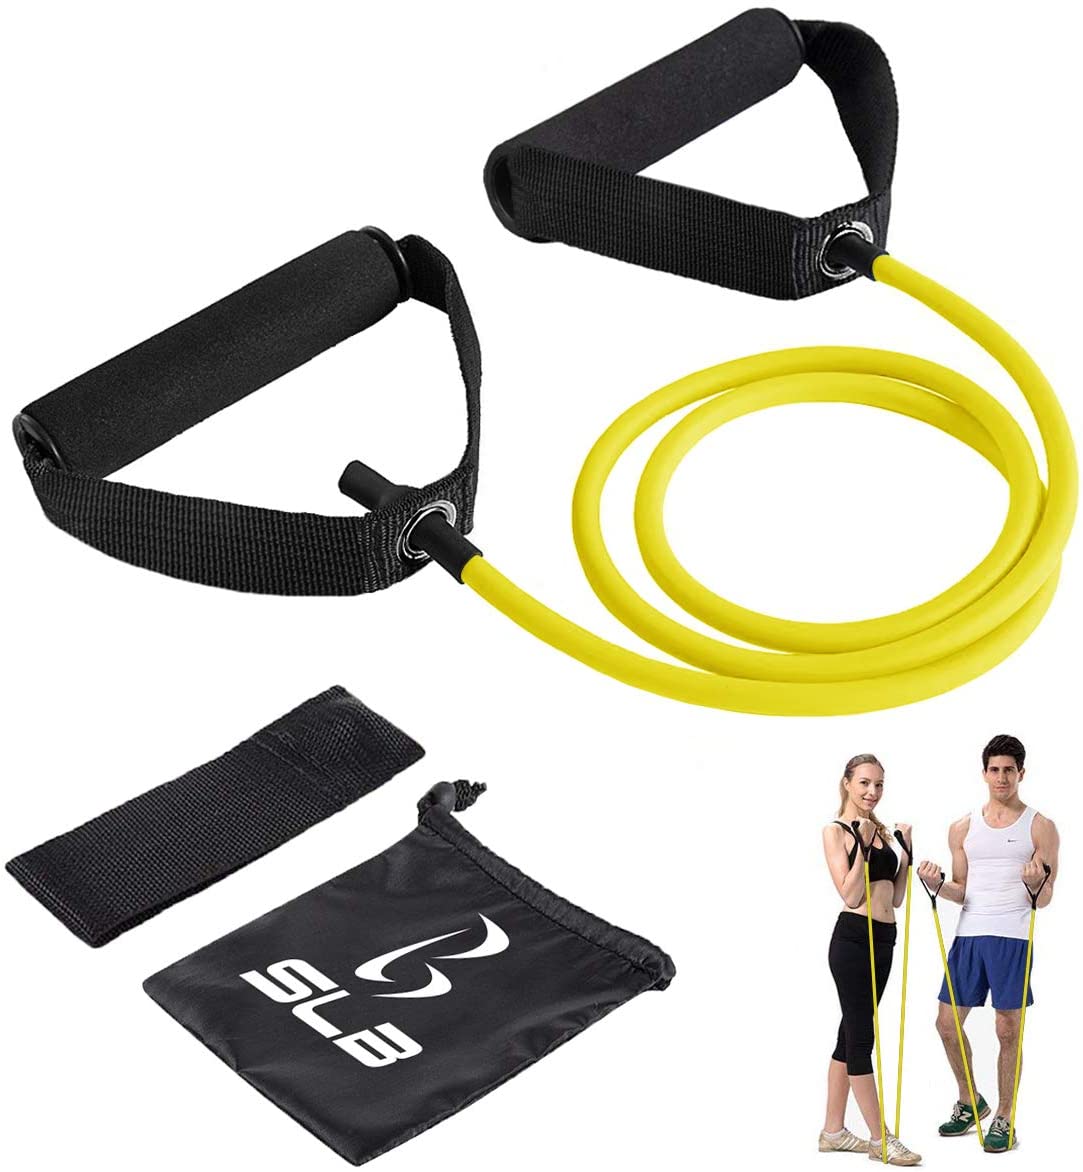 Top 10 best resistance bands for glutes in the UK